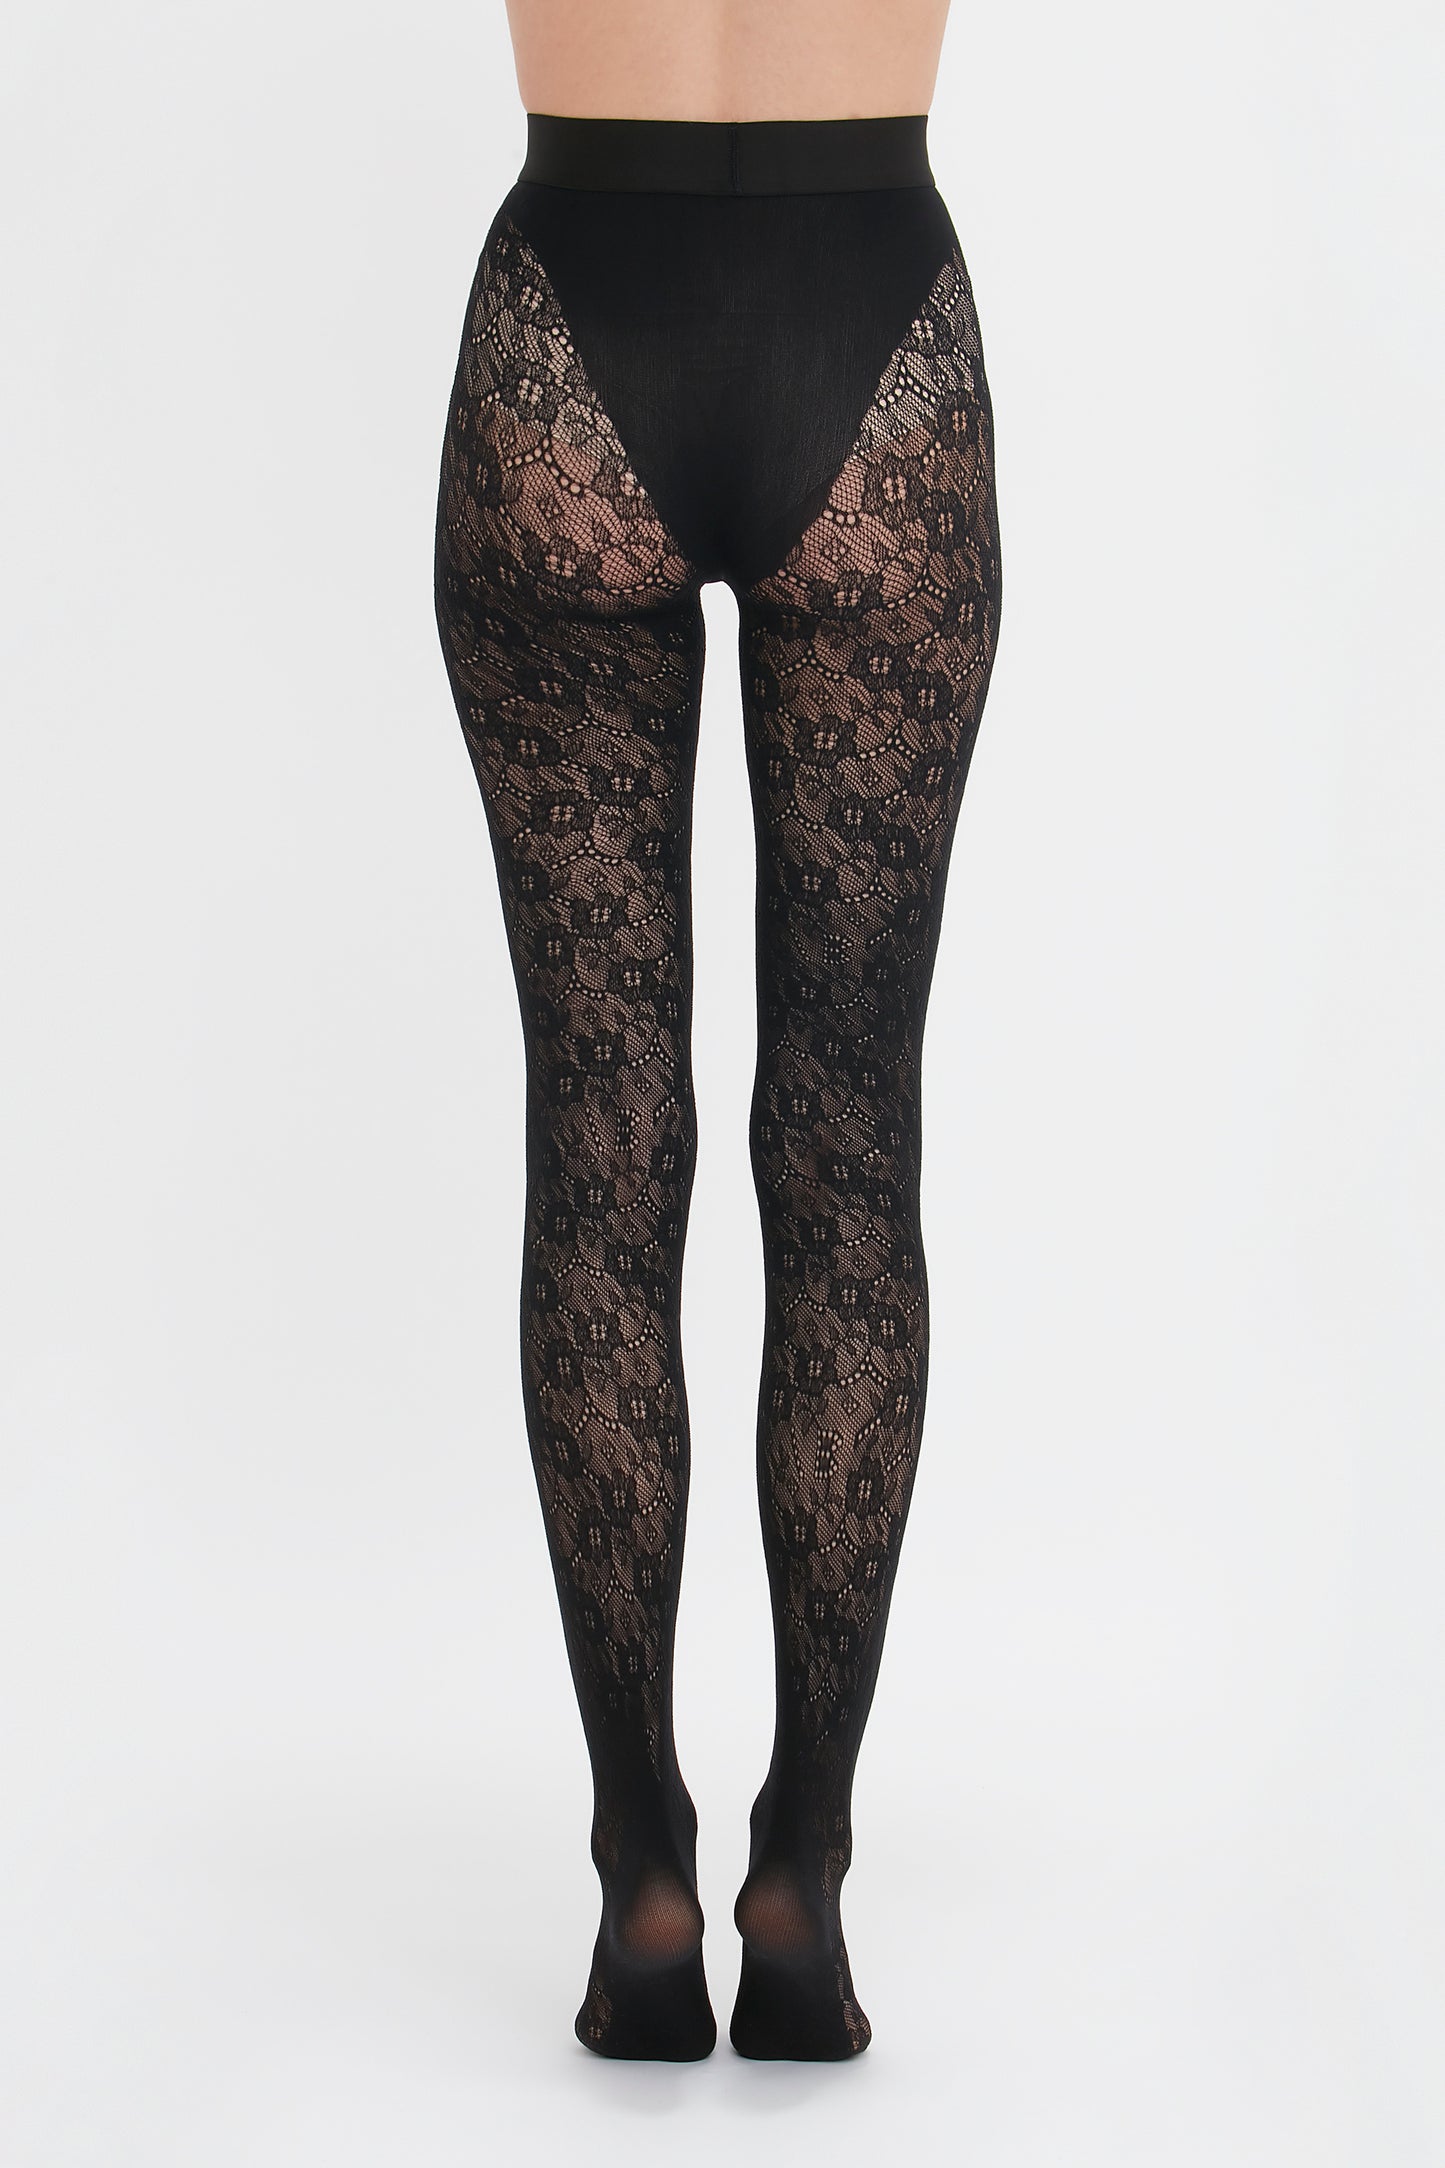 A person wearing black, intricate lace-patterned Victoria Beckham Monogram Lace Tights against a white background.